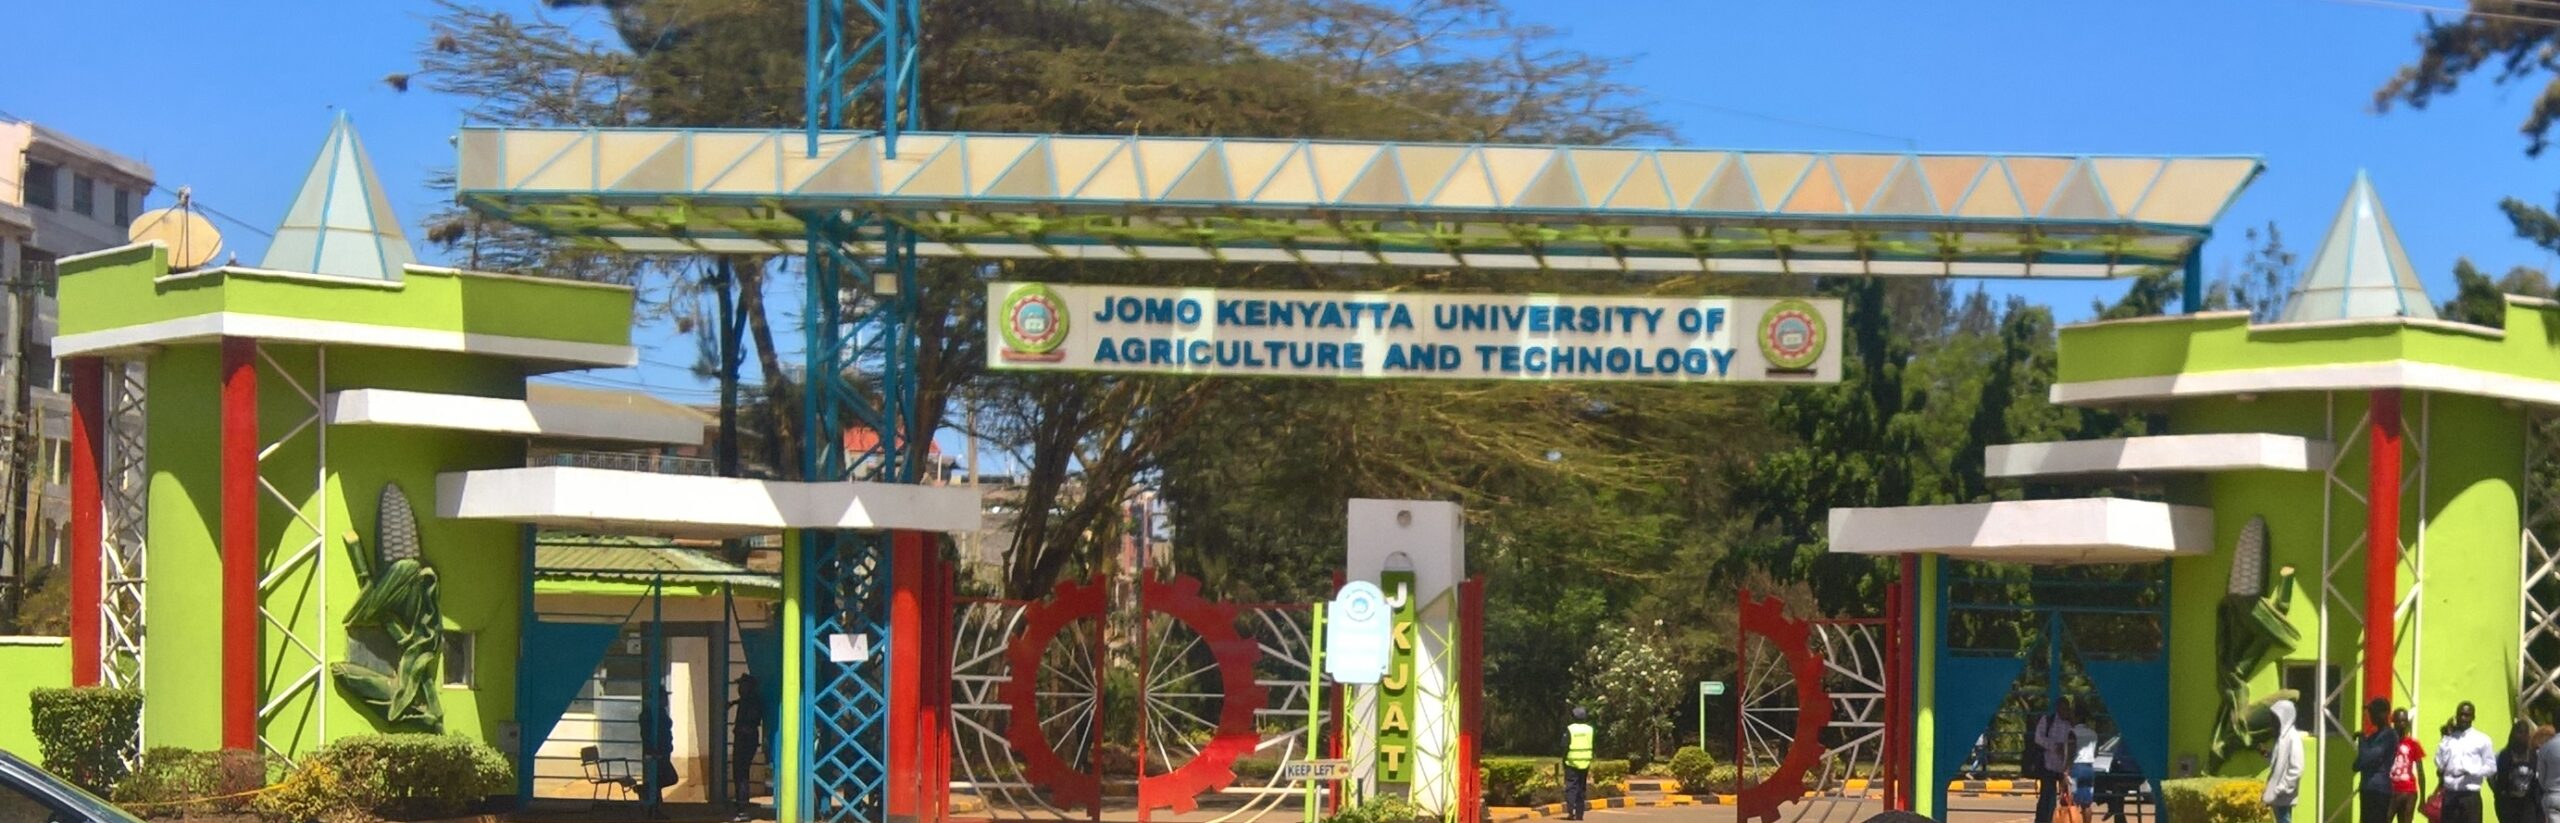 Job ready JKUAT, Microsoft ADC curriculum to start in September 2023